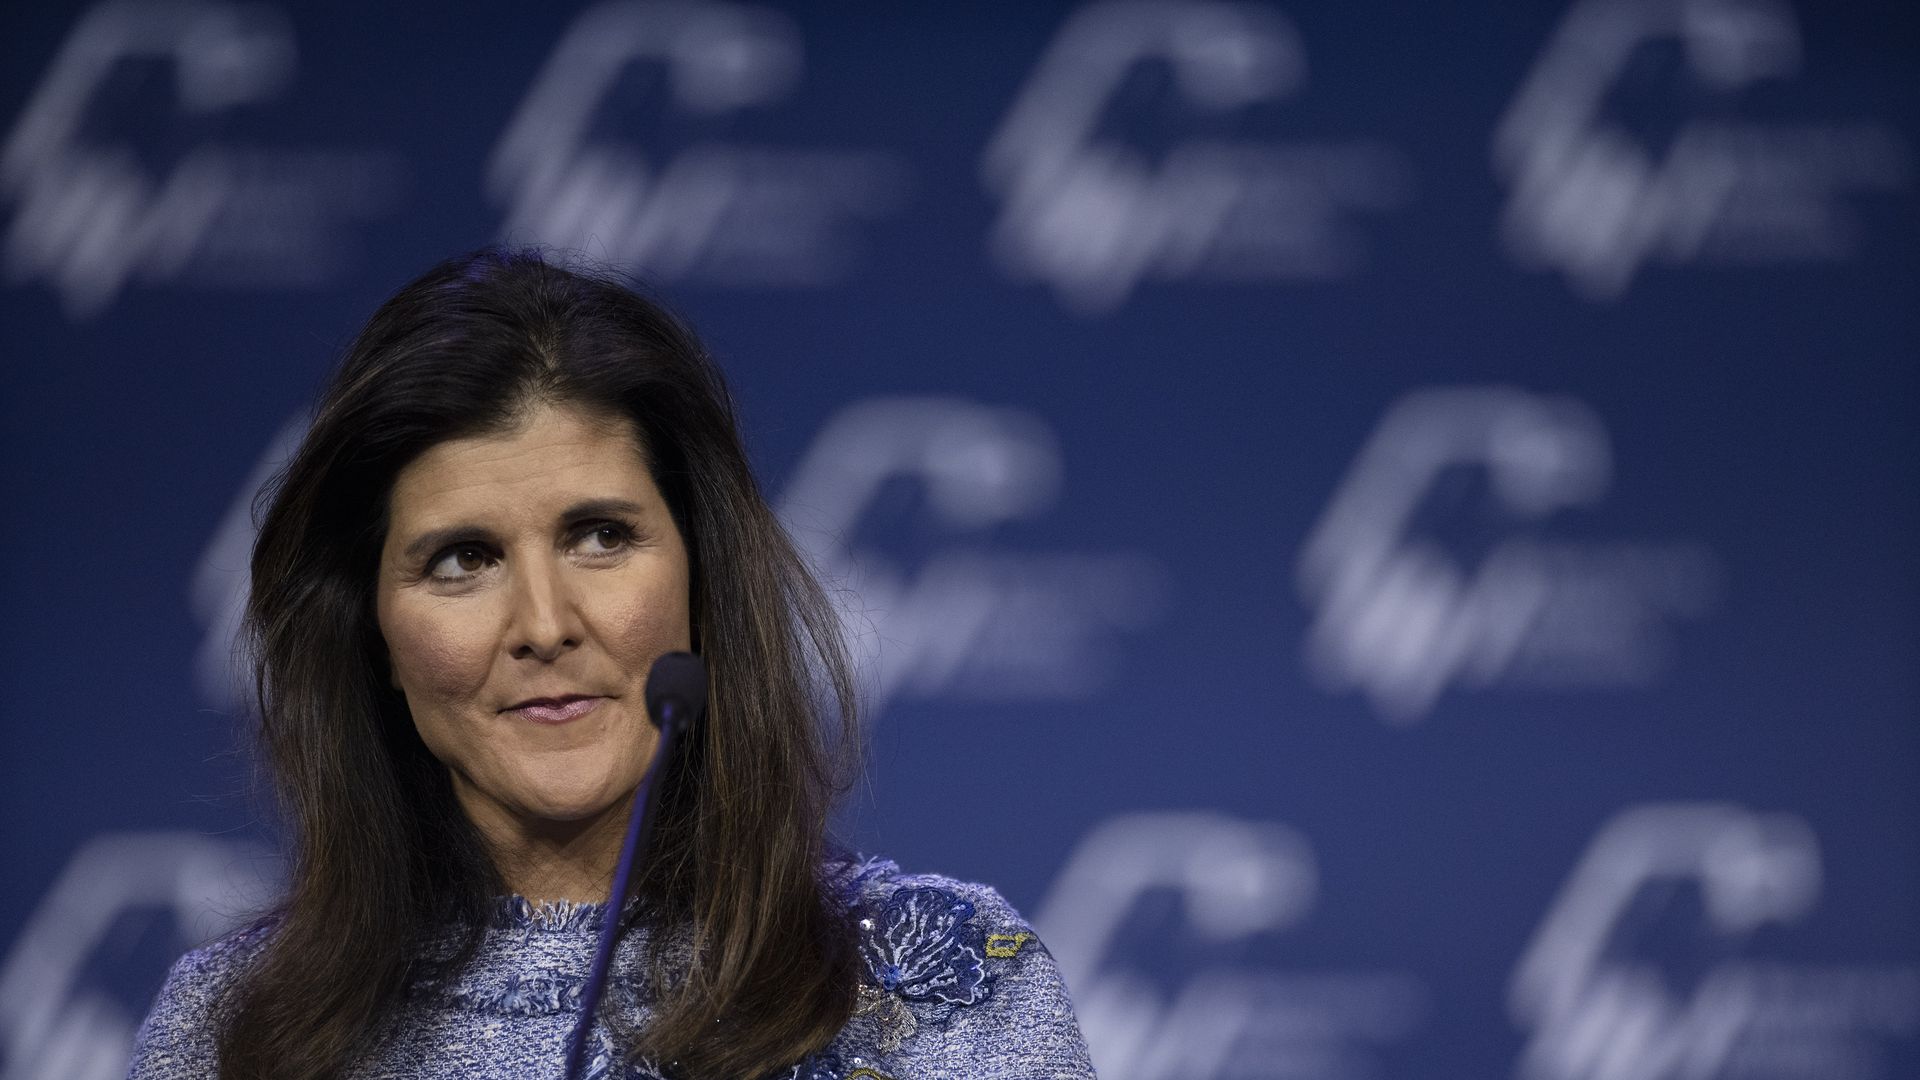 Nikki Haley, former ambassador to the United Nations, speaks during the Republican Jewish Coalition (RJC) Annual Leadership Meeting in Las Vegas, Nevada, U.S., on Saturday, Nov. 6